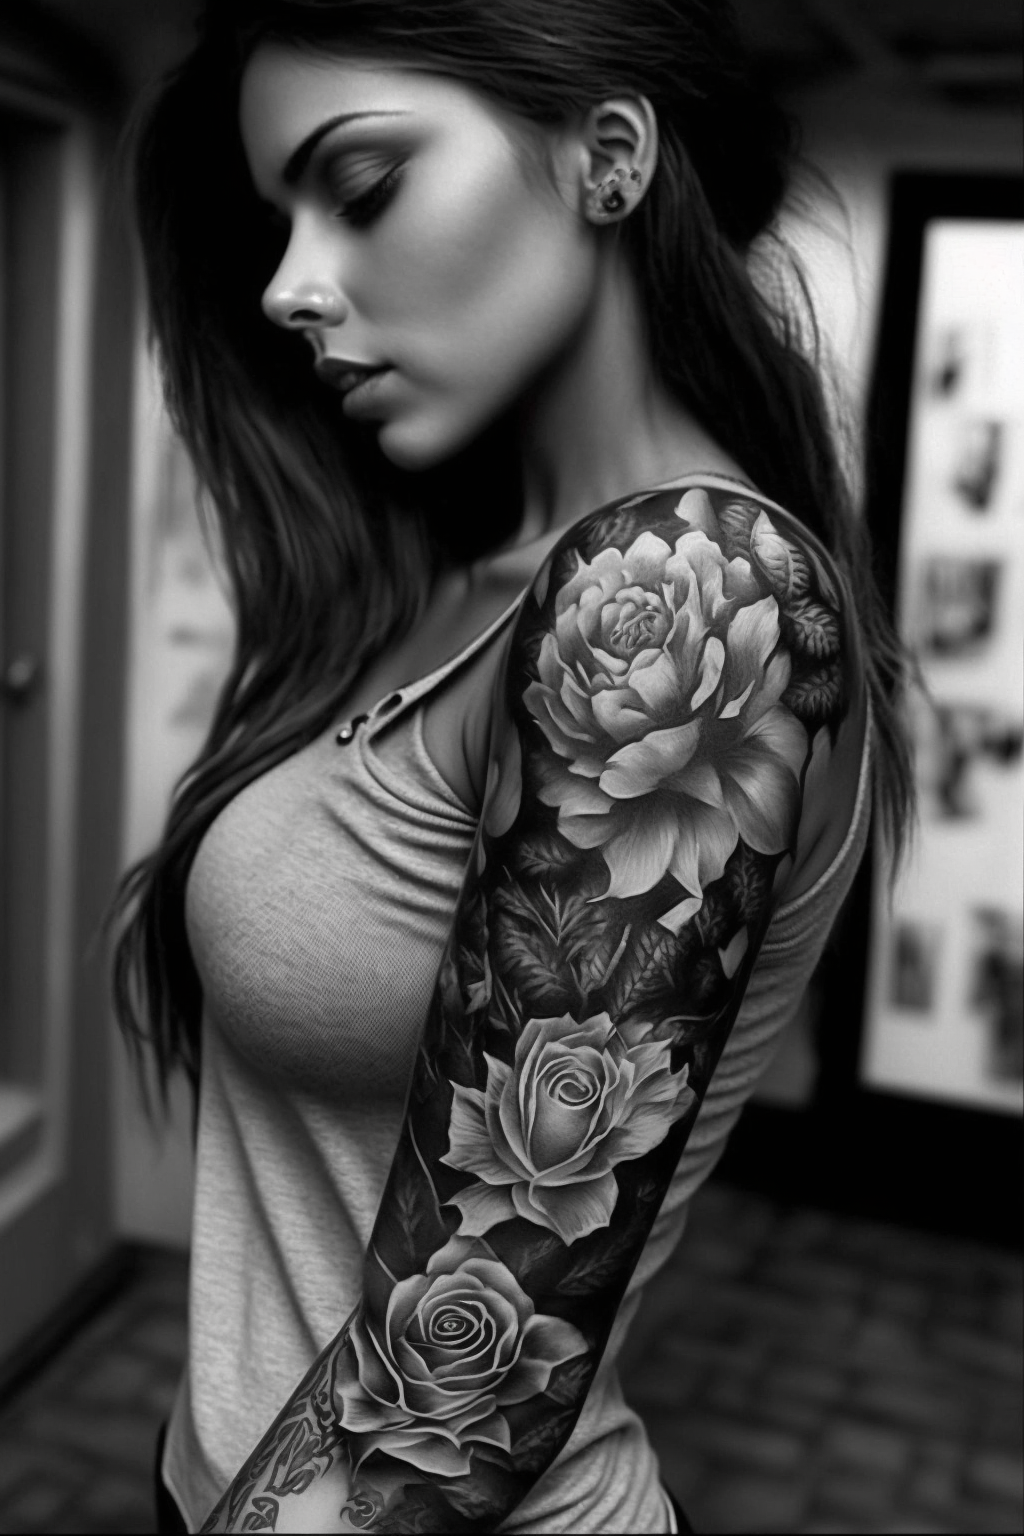 Fact 1 - Sleeve Tattoos for Women: Not Everyone Can Get Them